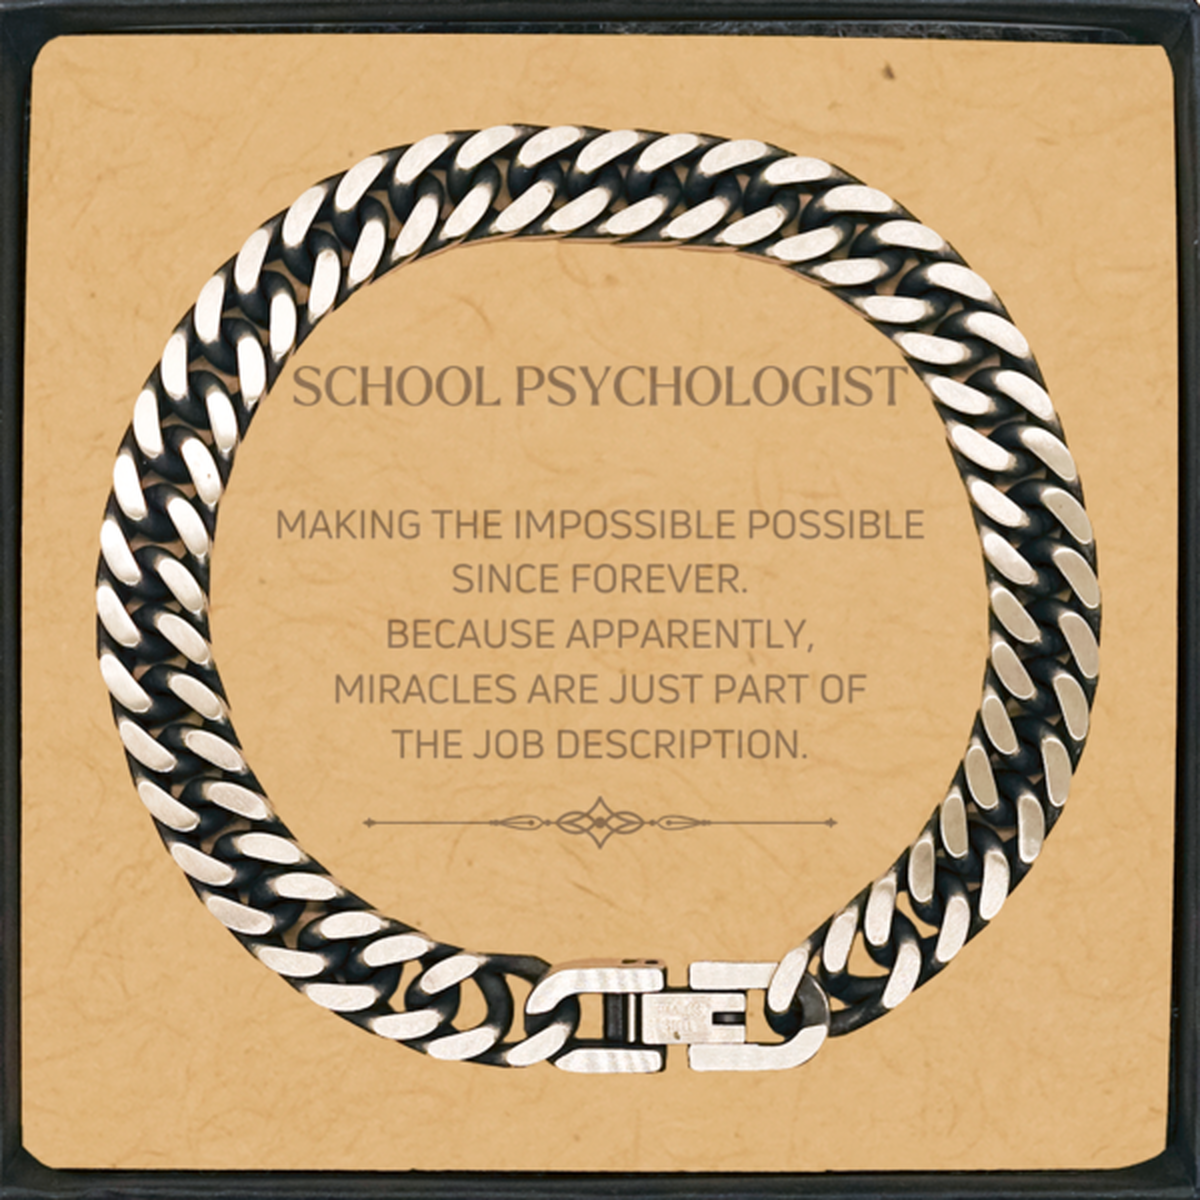 Funny School Psychologist Gifts, Miracles are just part of the job description, Inspirational Birthday Cuban Link Chain Bracelet For School Psychologist, Men, Women, Coworkers, Friends, Boss